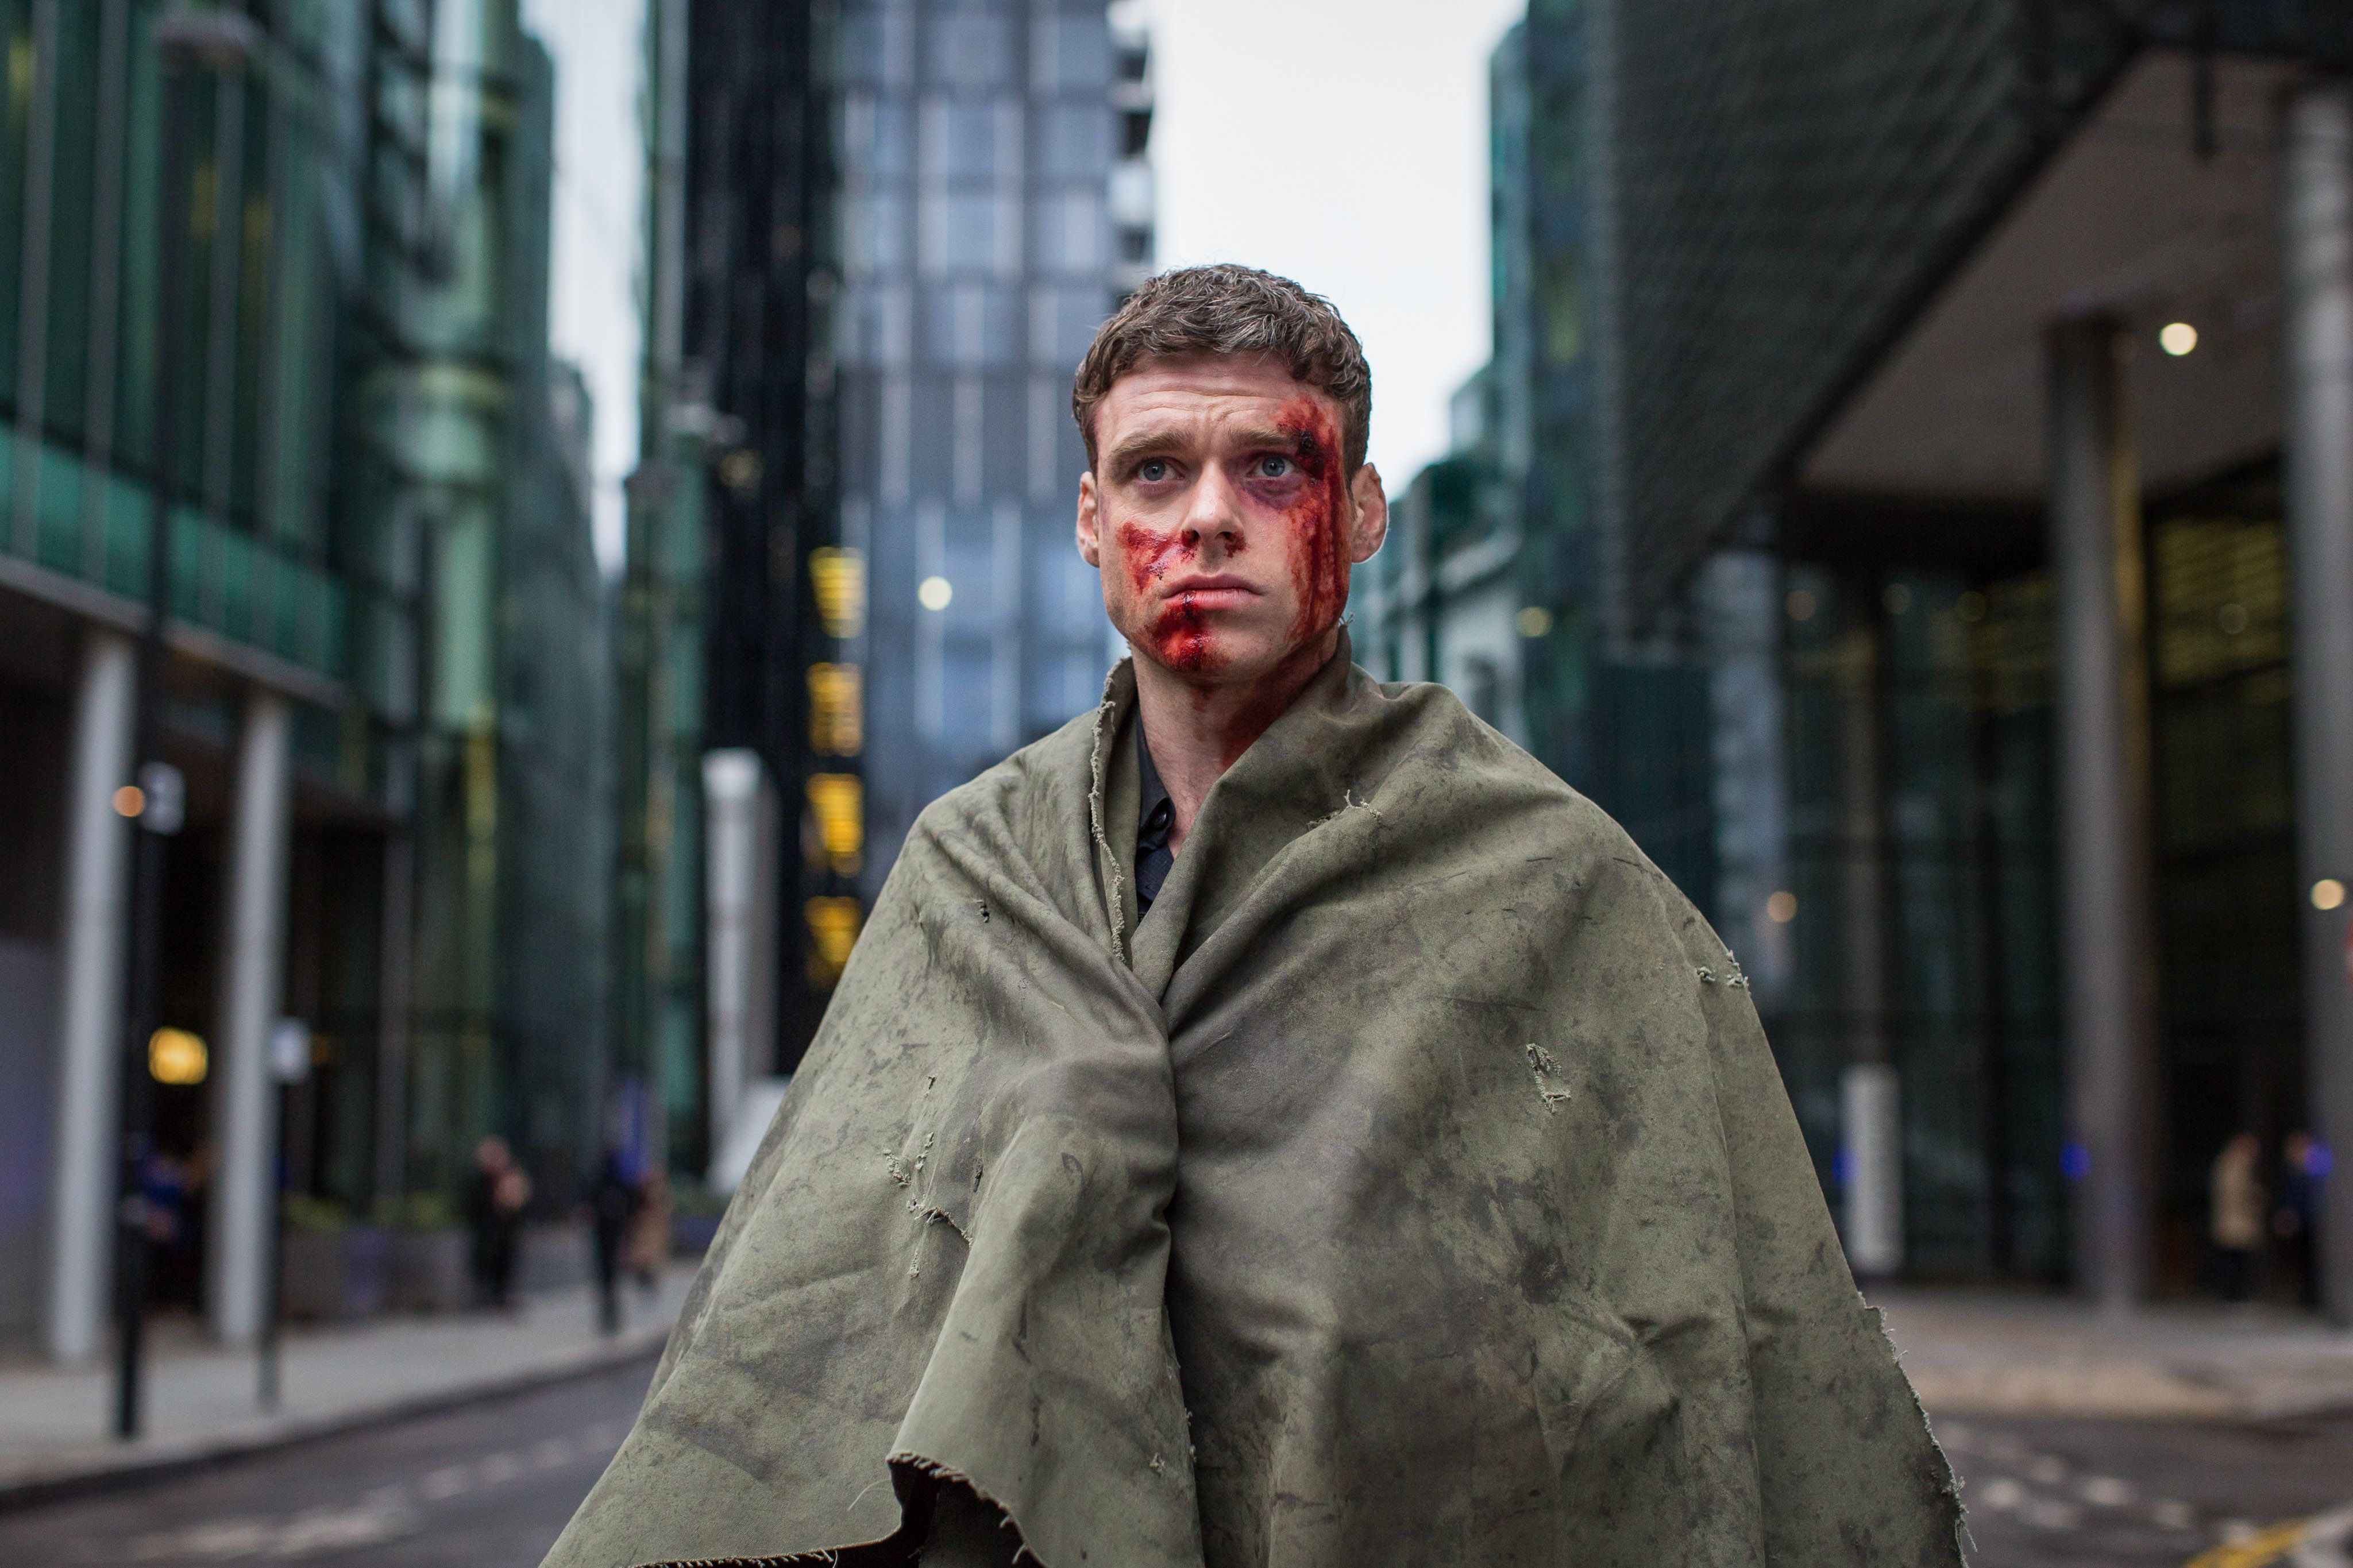 Bodyguard episode 6 finale picture hint at a bloody climax for Richard Madden's David Budd